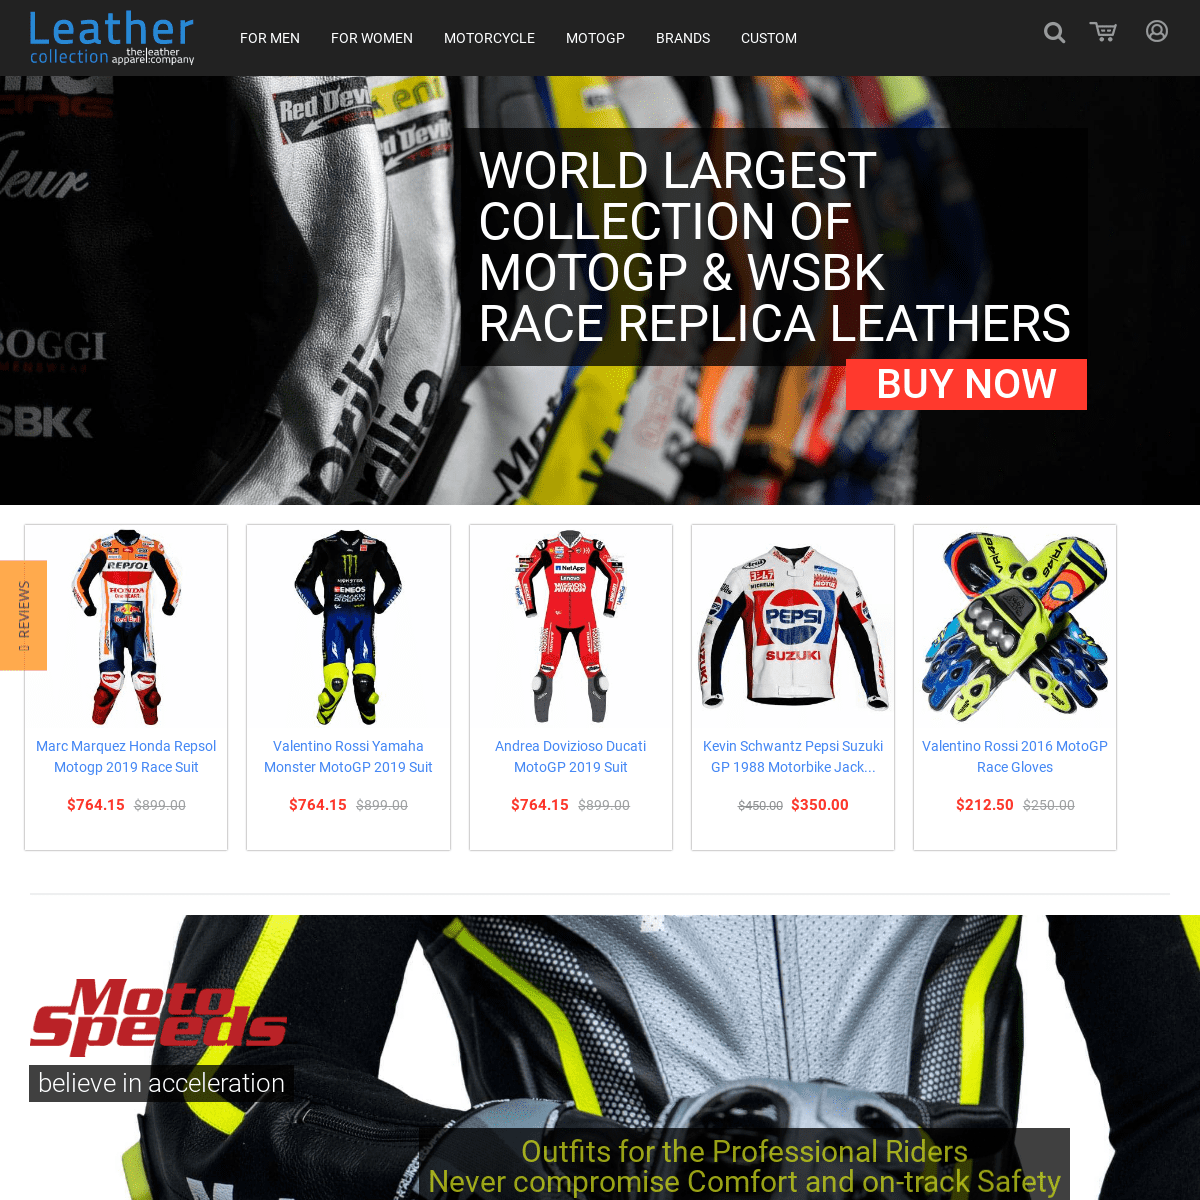 Motorcycle Leathers - Leather Motorcycle Jacket | Leather Collection